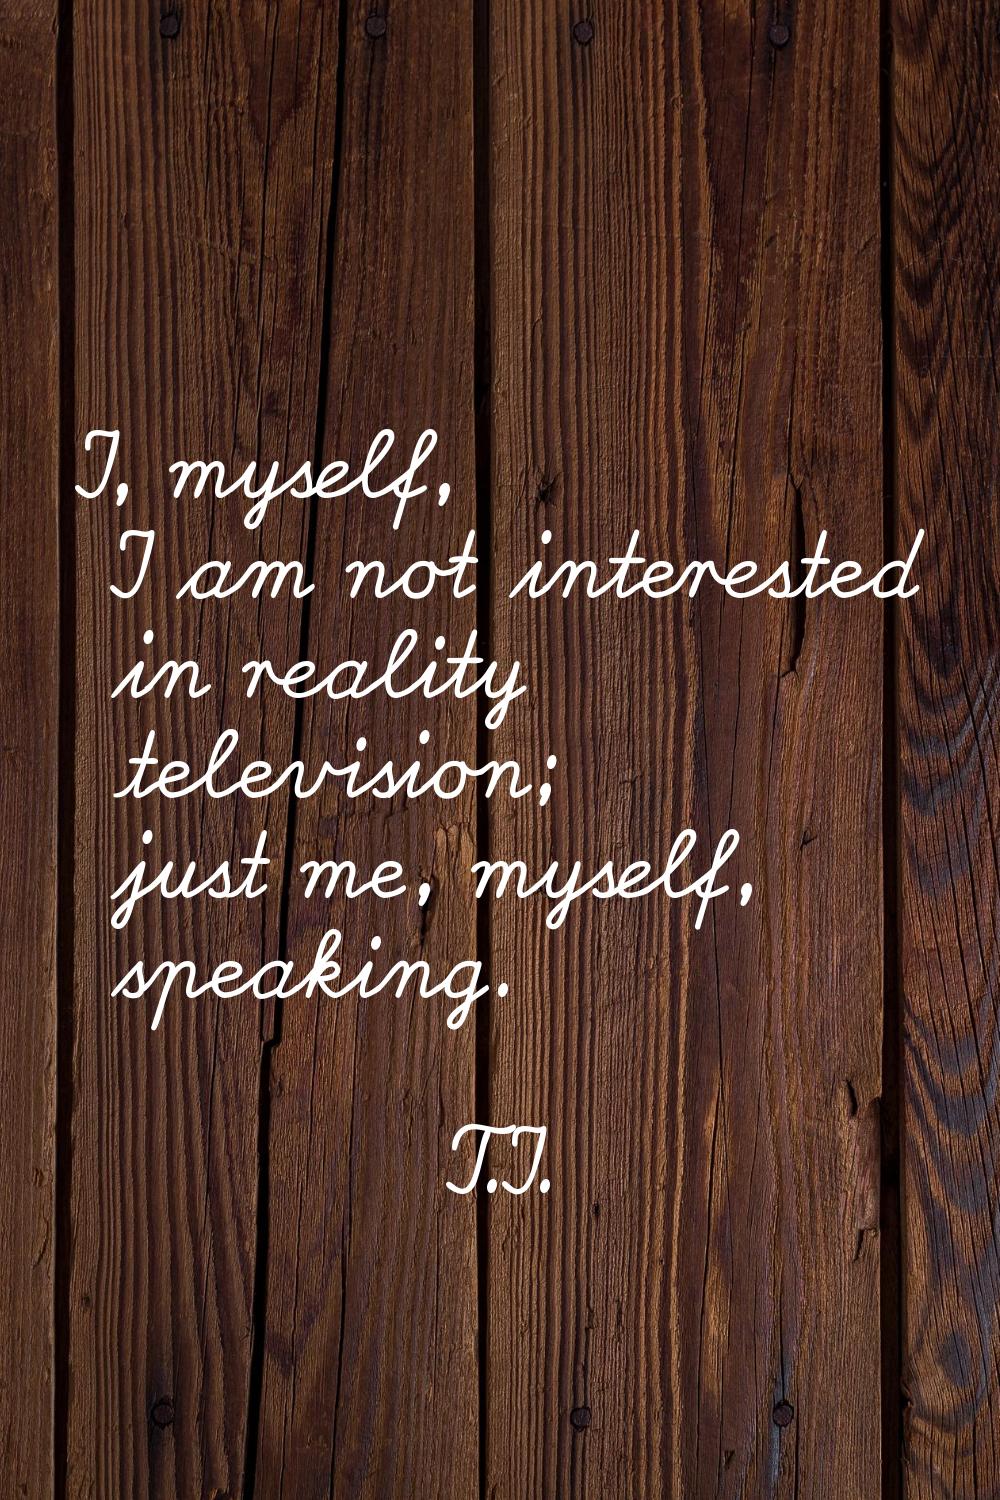 I, myself, I am not interested in reality television; just me, myself, speaking.